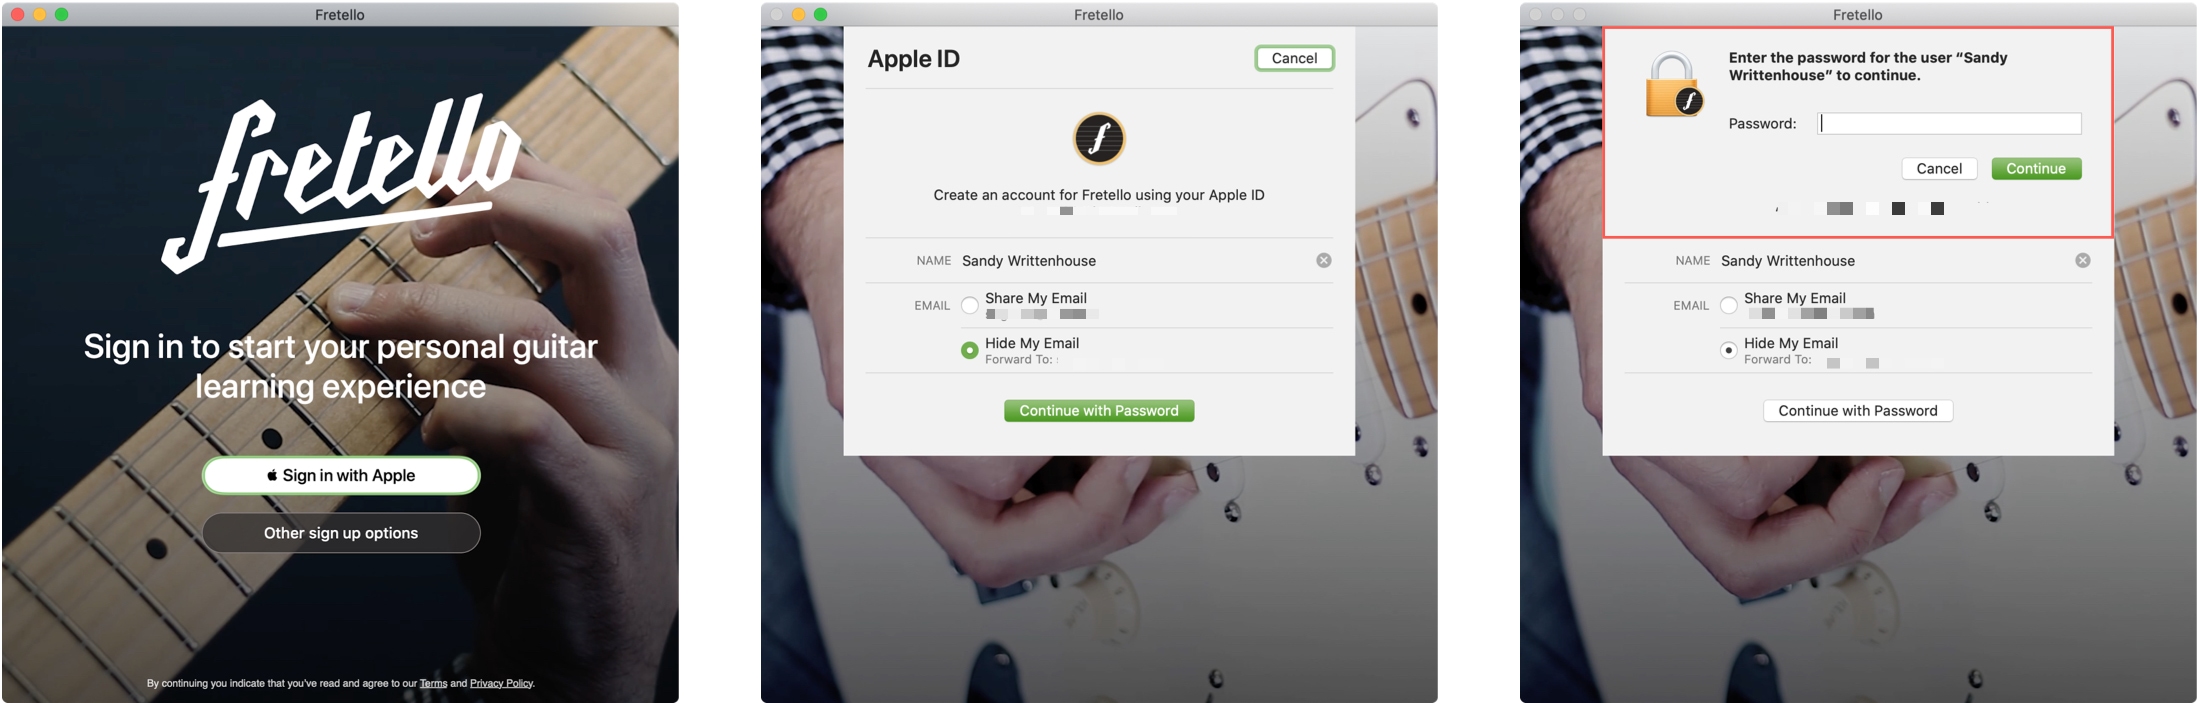 Fretello Sign in with Apple Mac